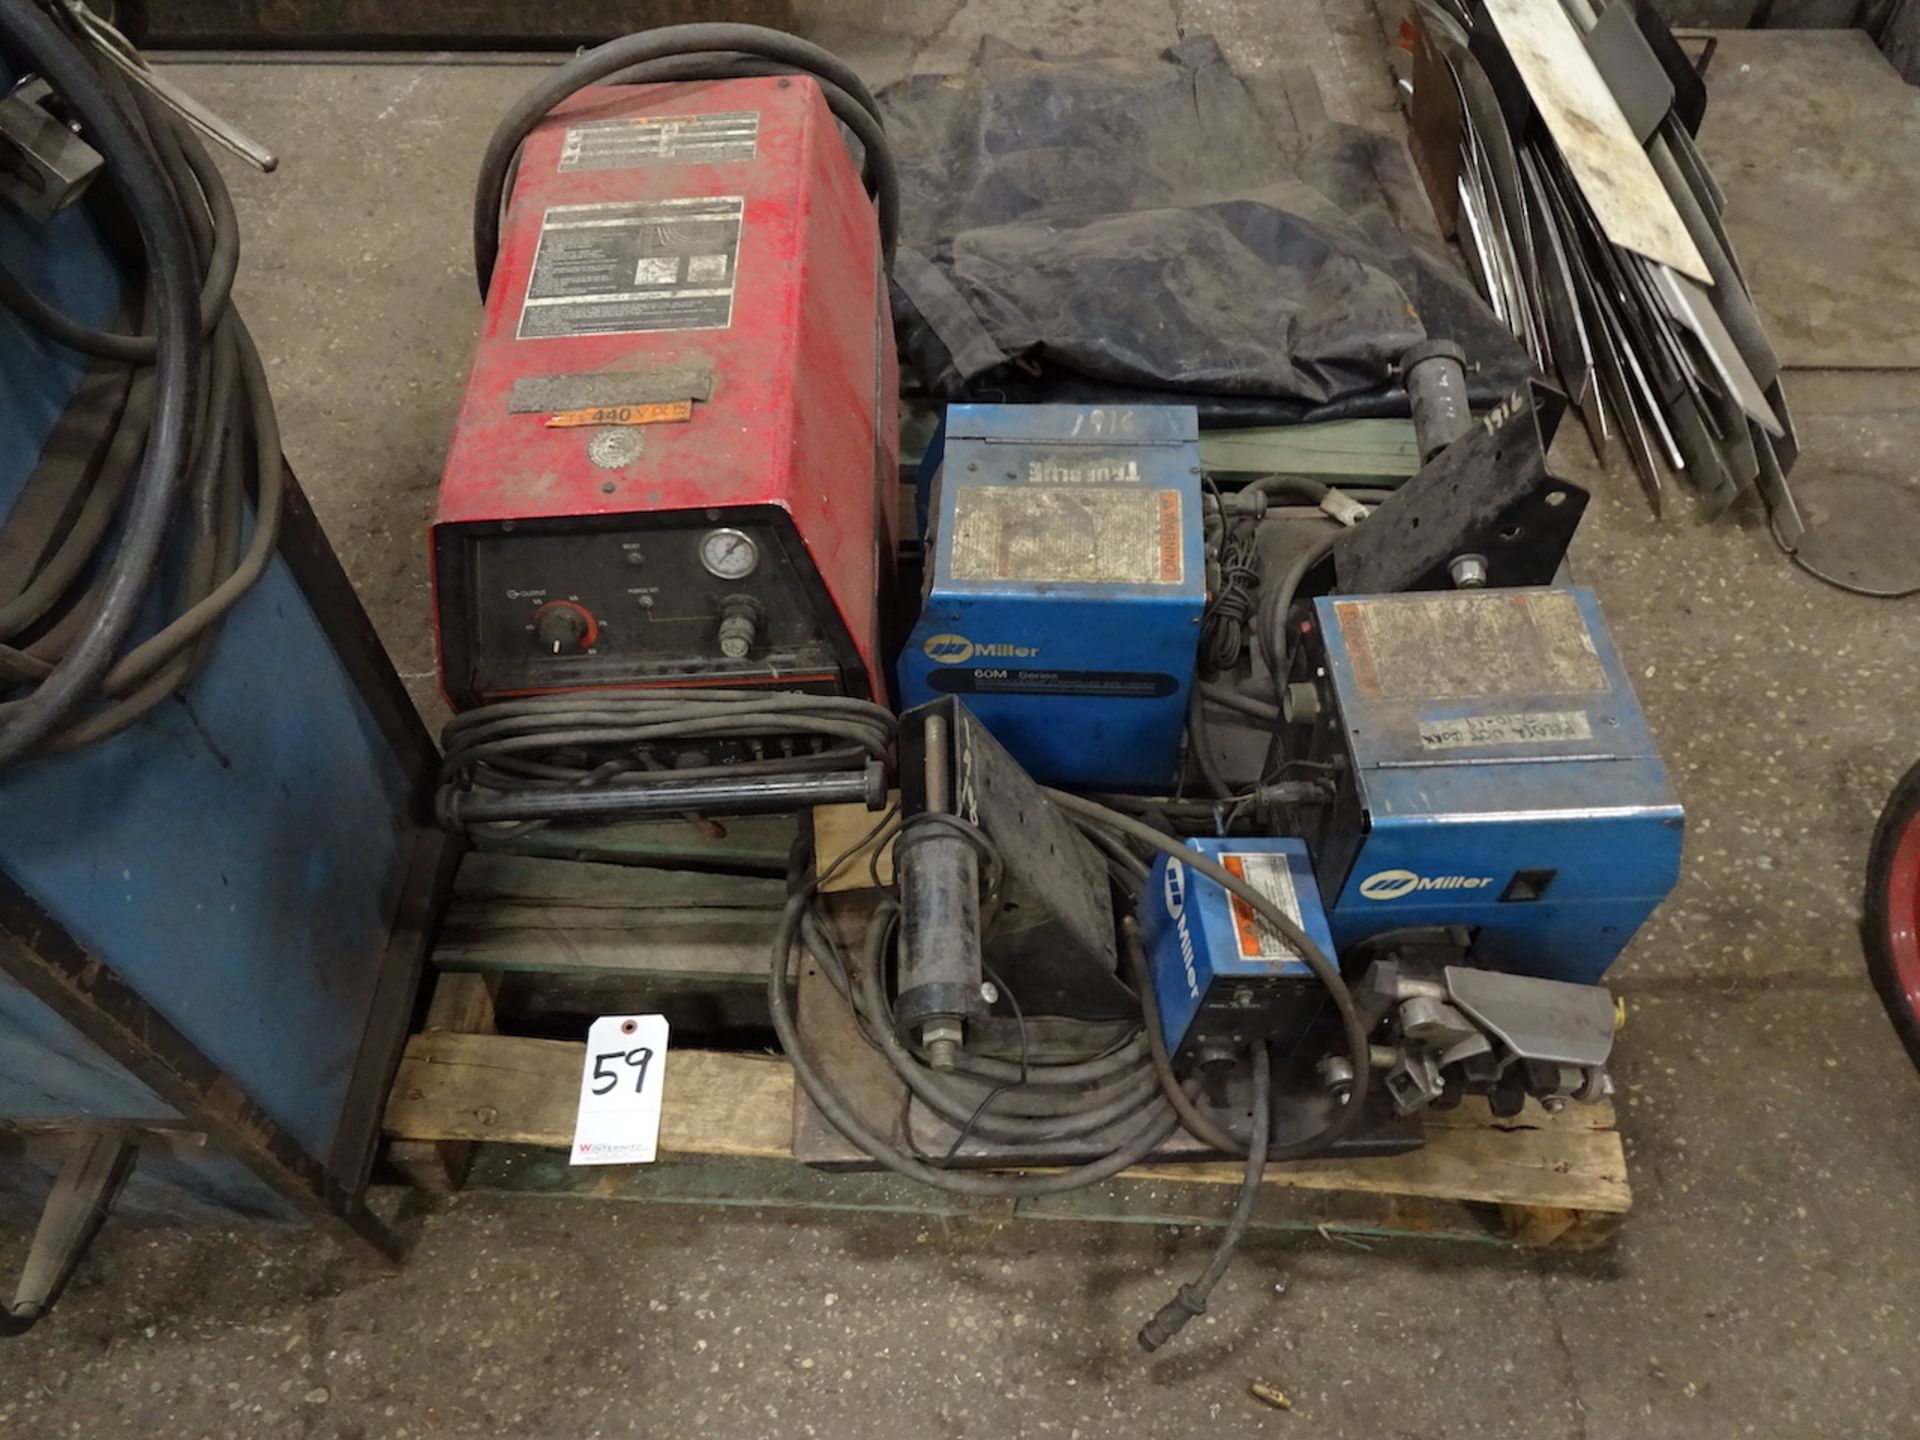 LOT: Lincoln Pro-Cut 80 Plasma Cutter & Miller Wire Feeders, etc. on (1) Skid